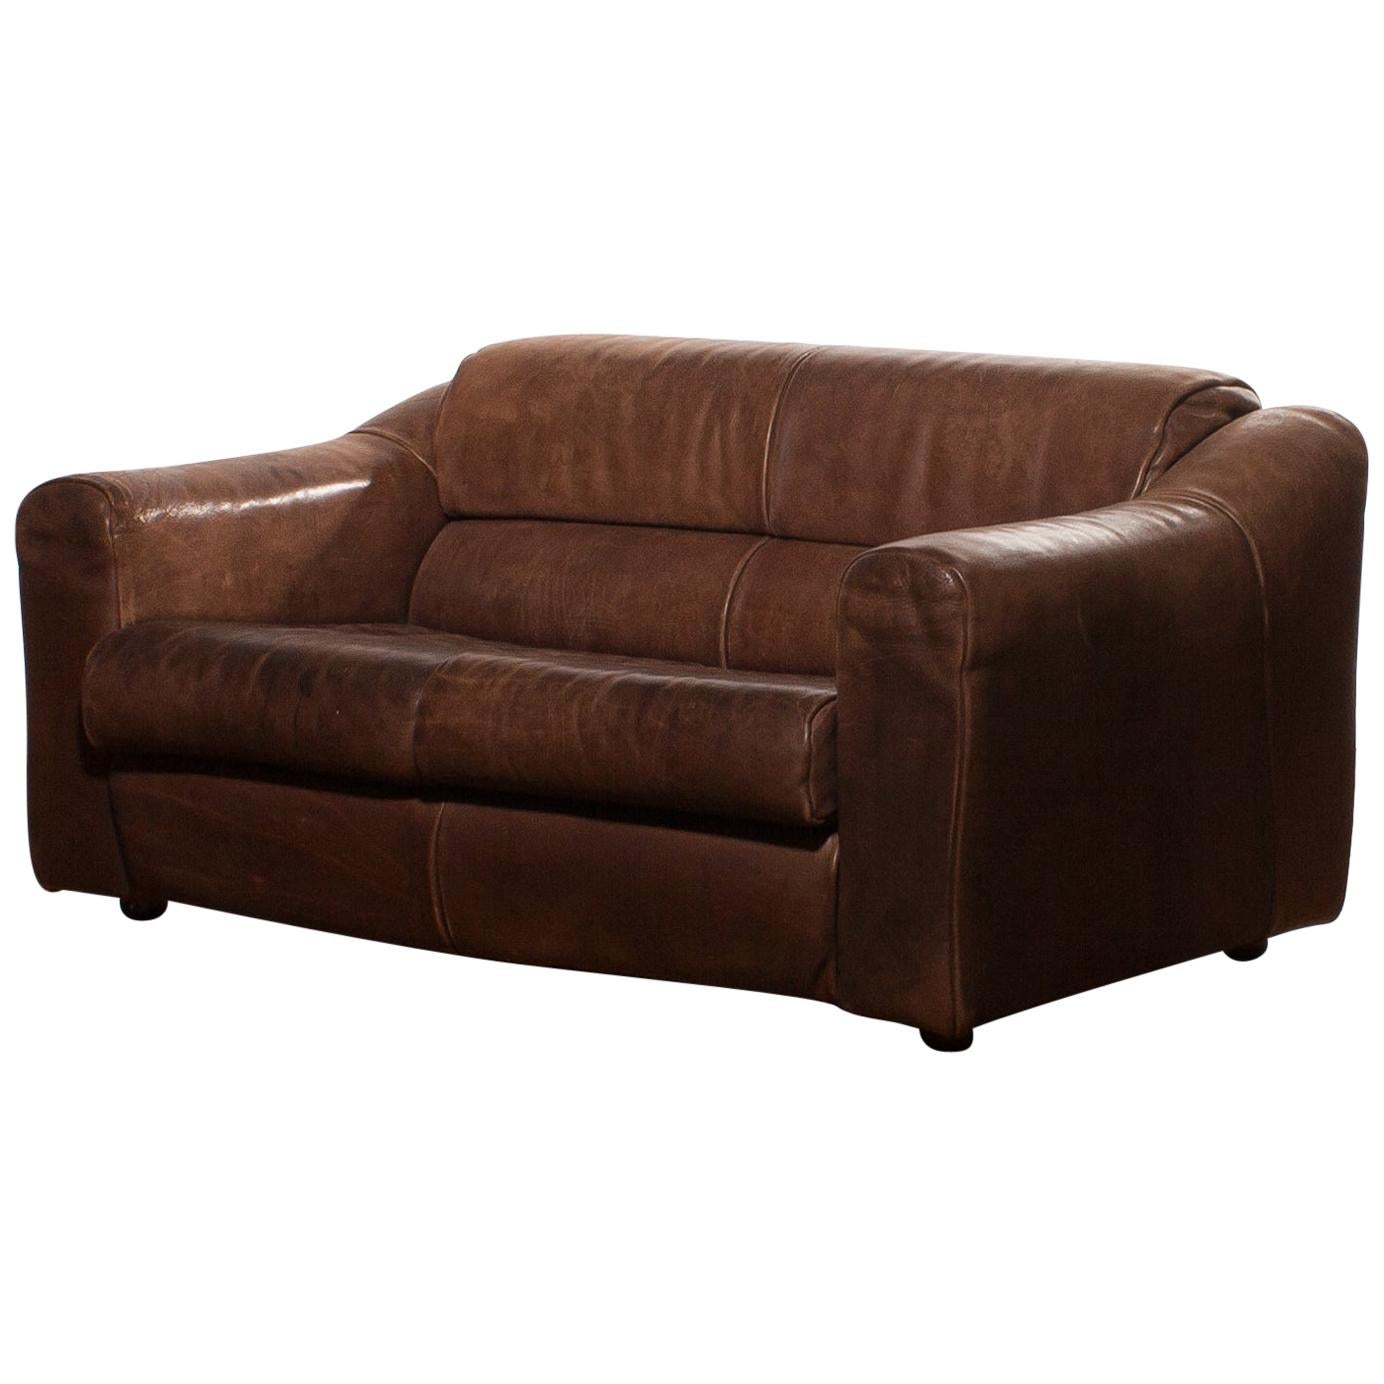 1970s Buffalo Leather Two-Seat Sofa In Good Condition In Silvolde, Gelderland